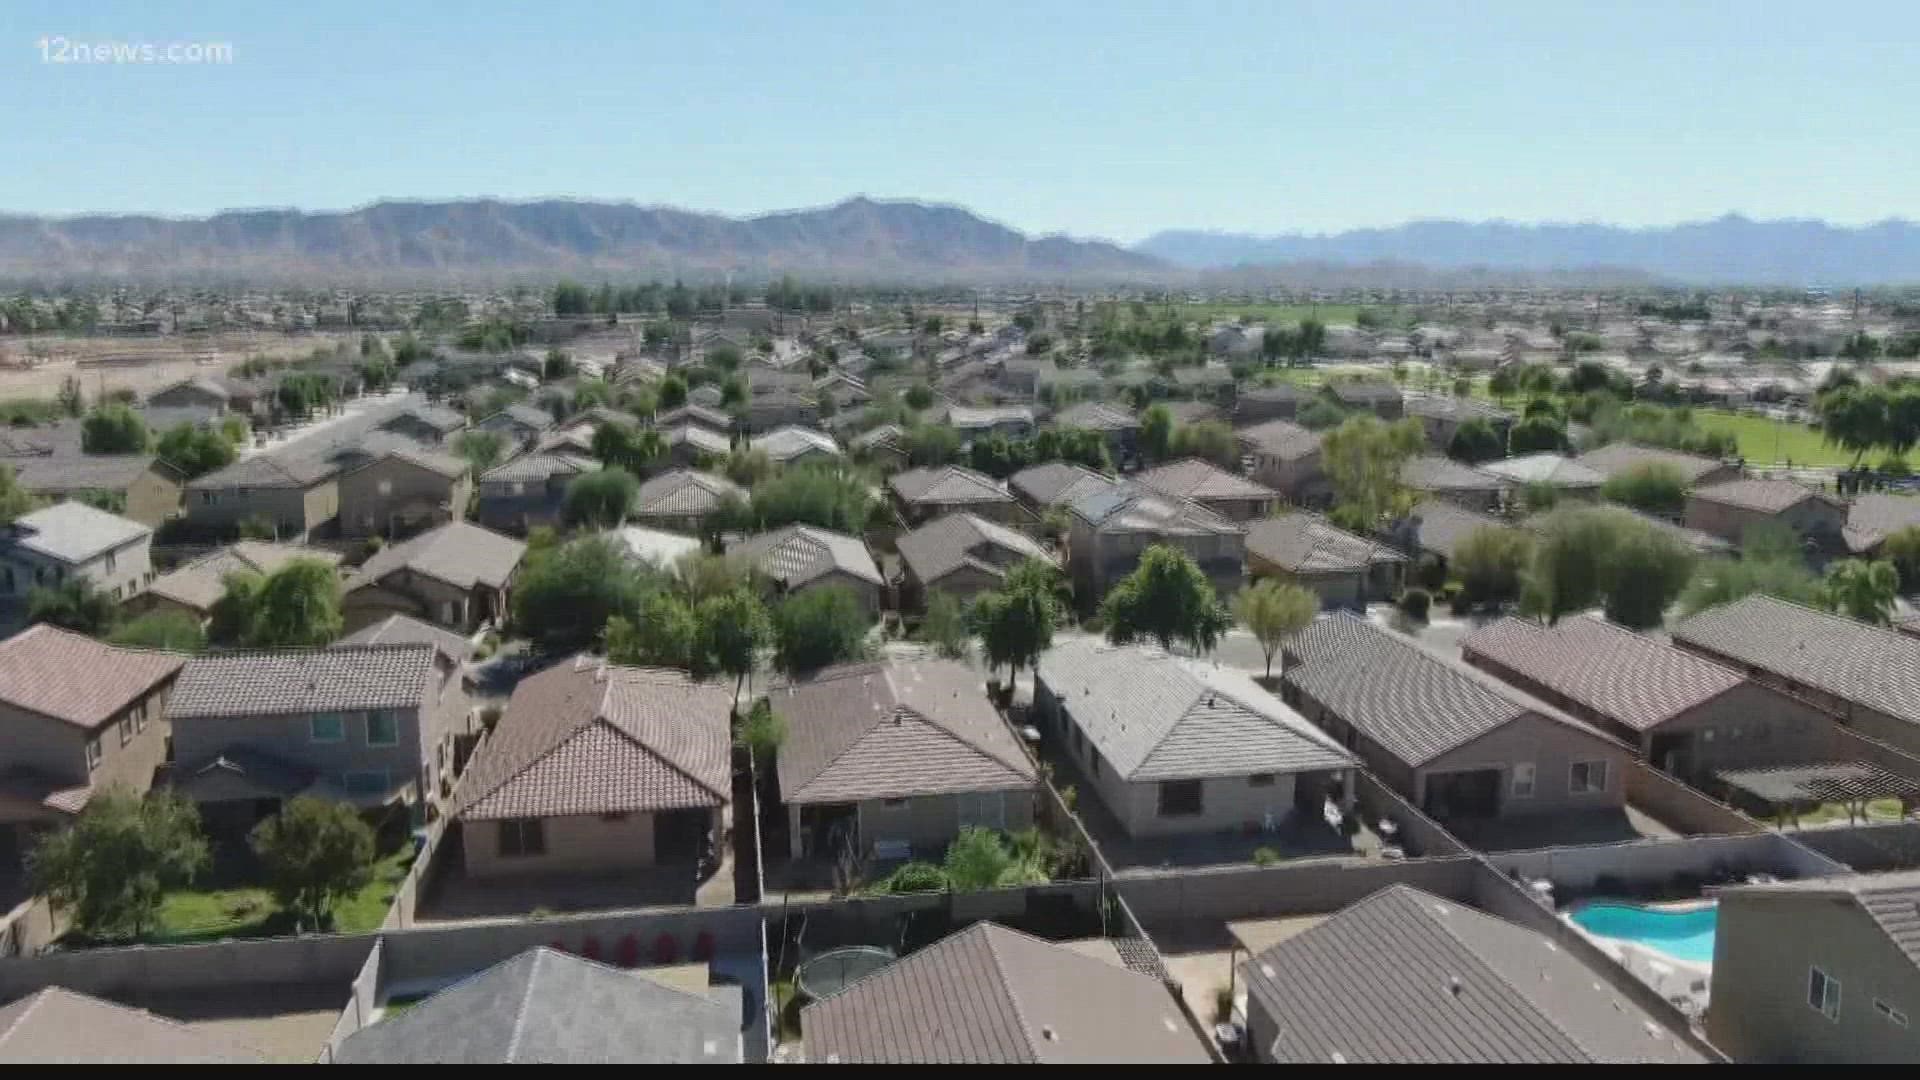 The Phoenix housing market is in the midst of a supply and demand crisis that started during the pandemic.